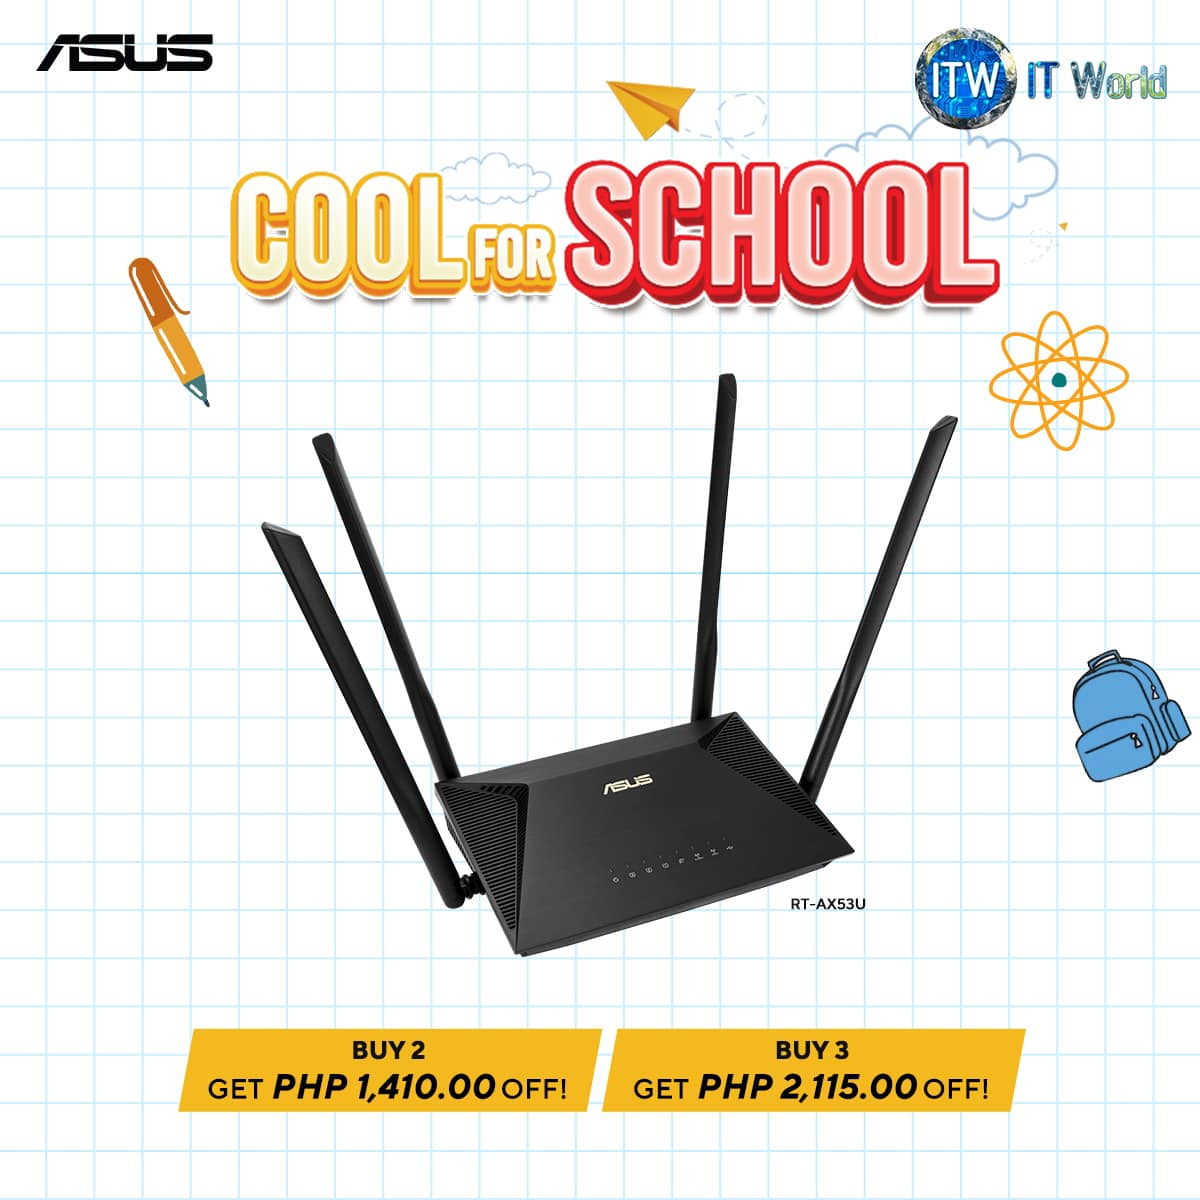 ASUS WiFi 6 Router with Security, Parental Control, and VPN